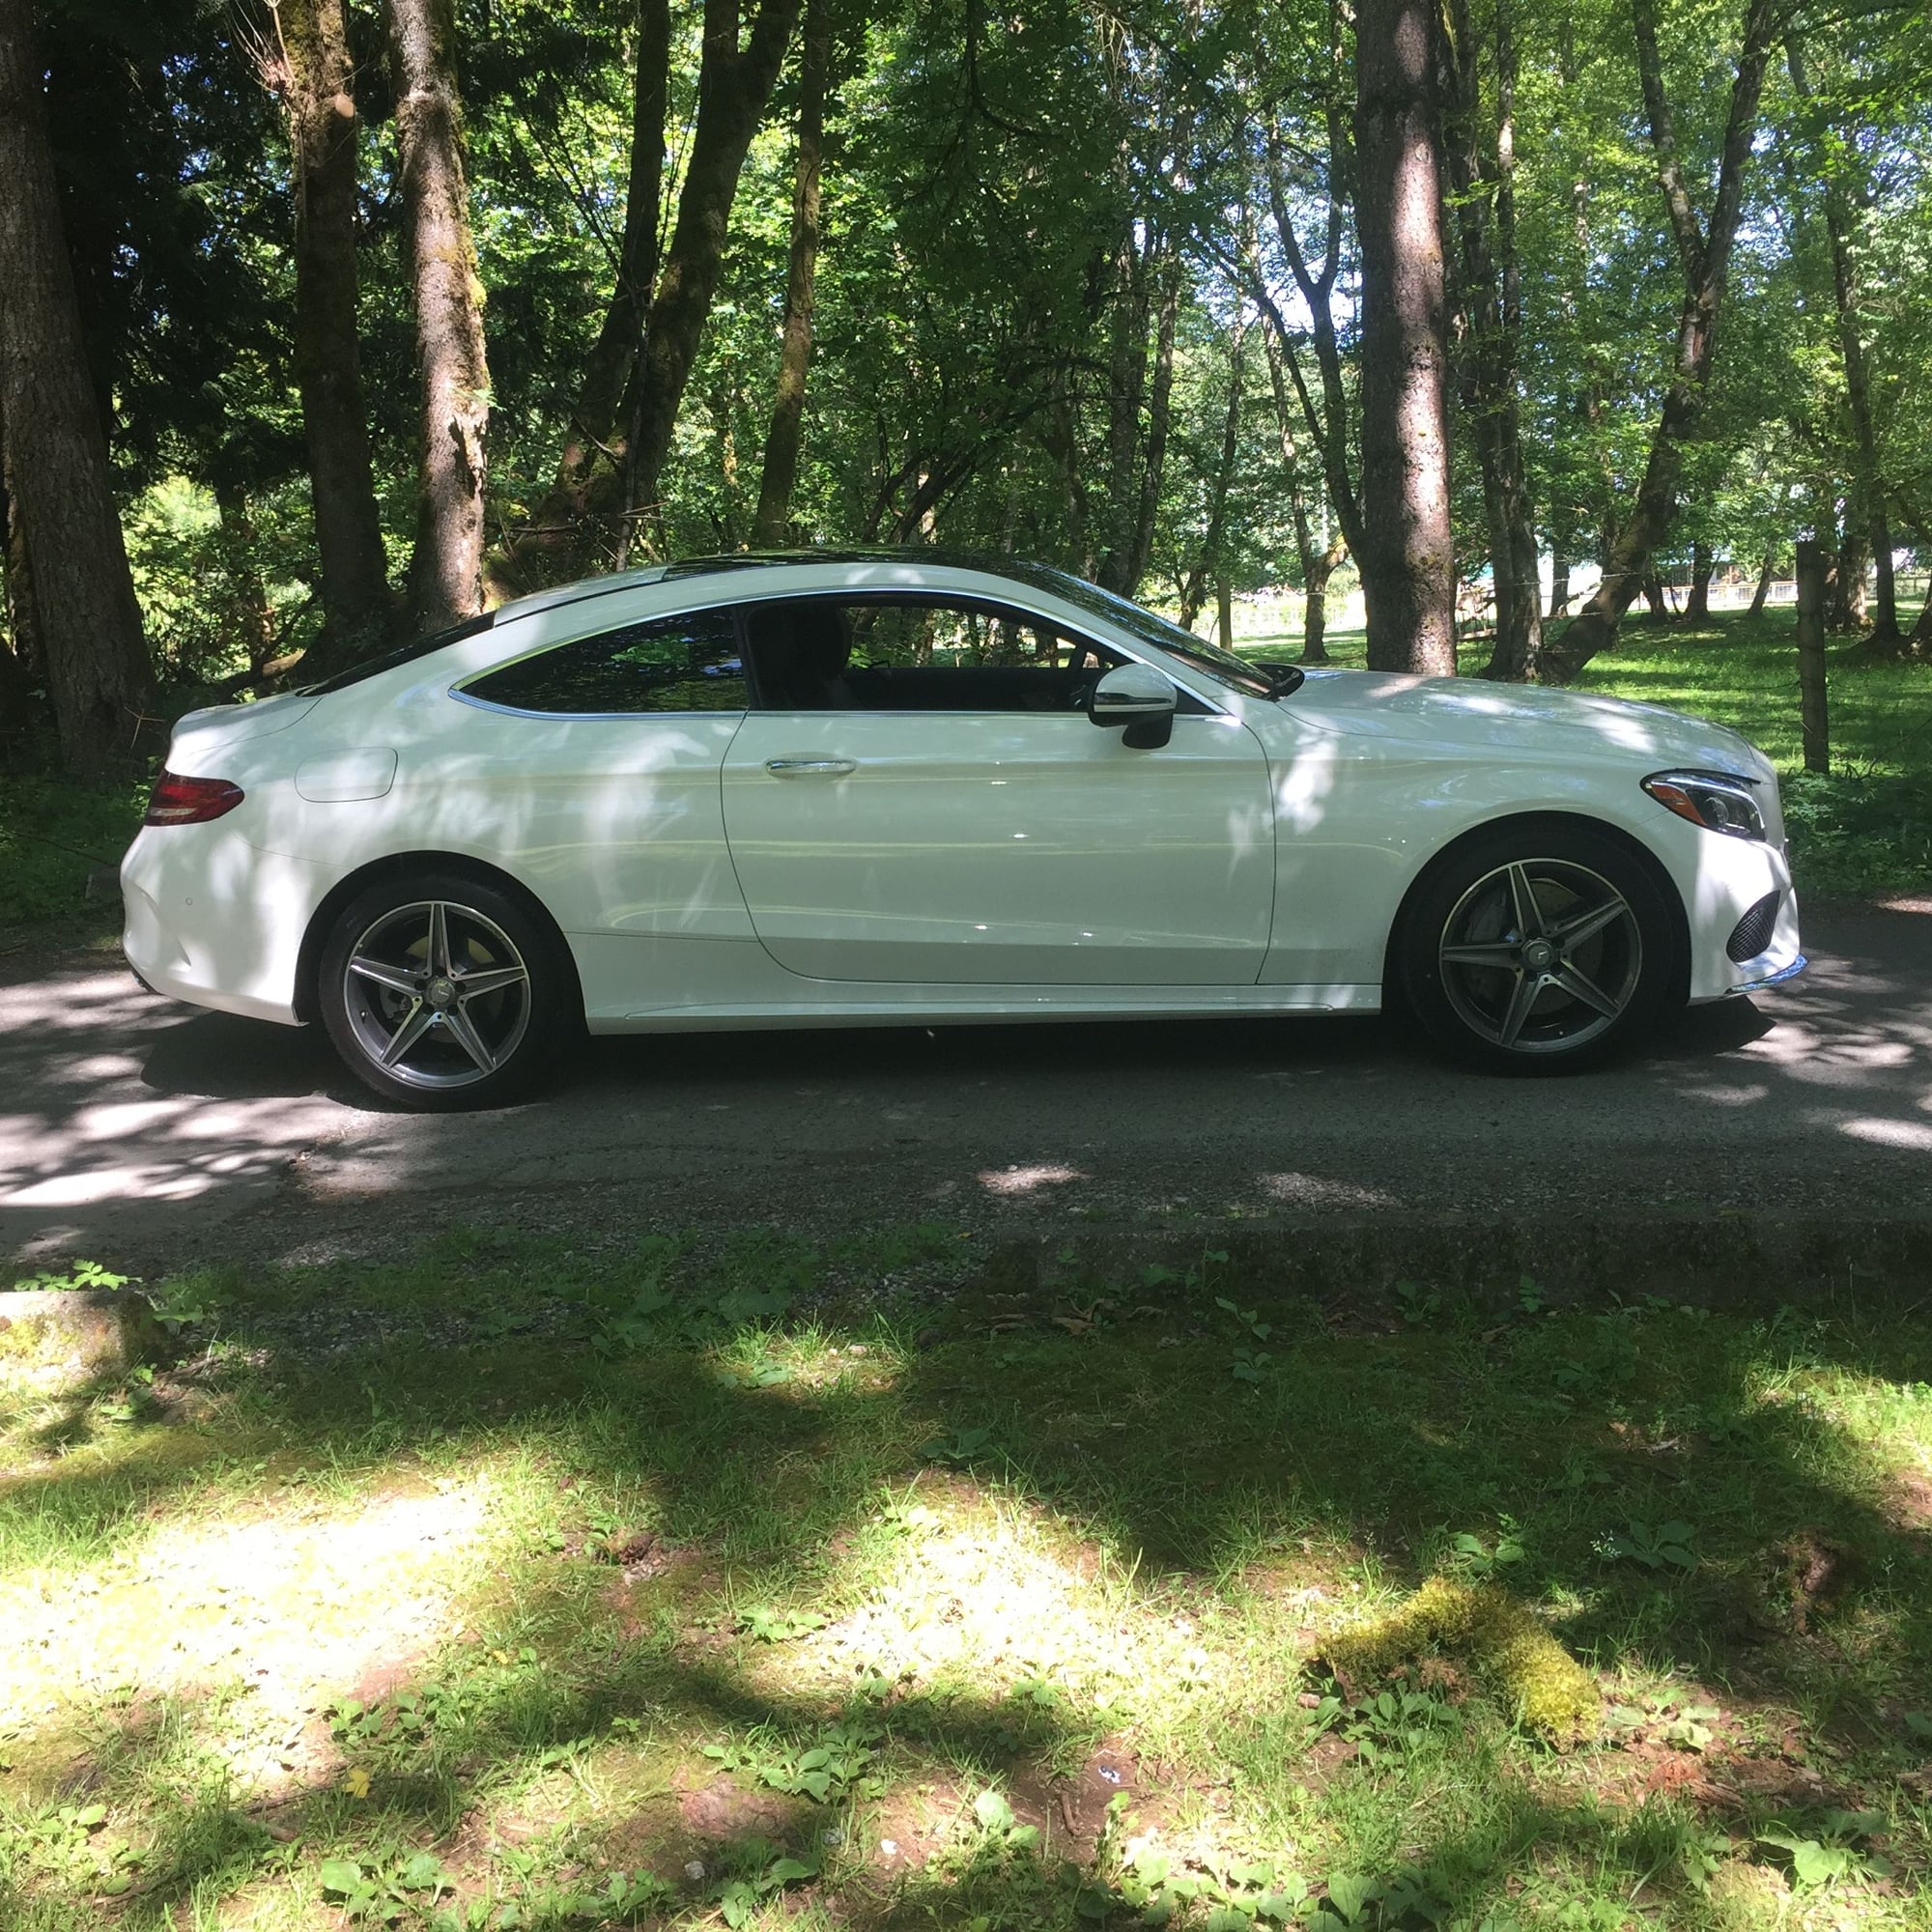 New. 2017 c300 coupe - MBWorld.org Forums